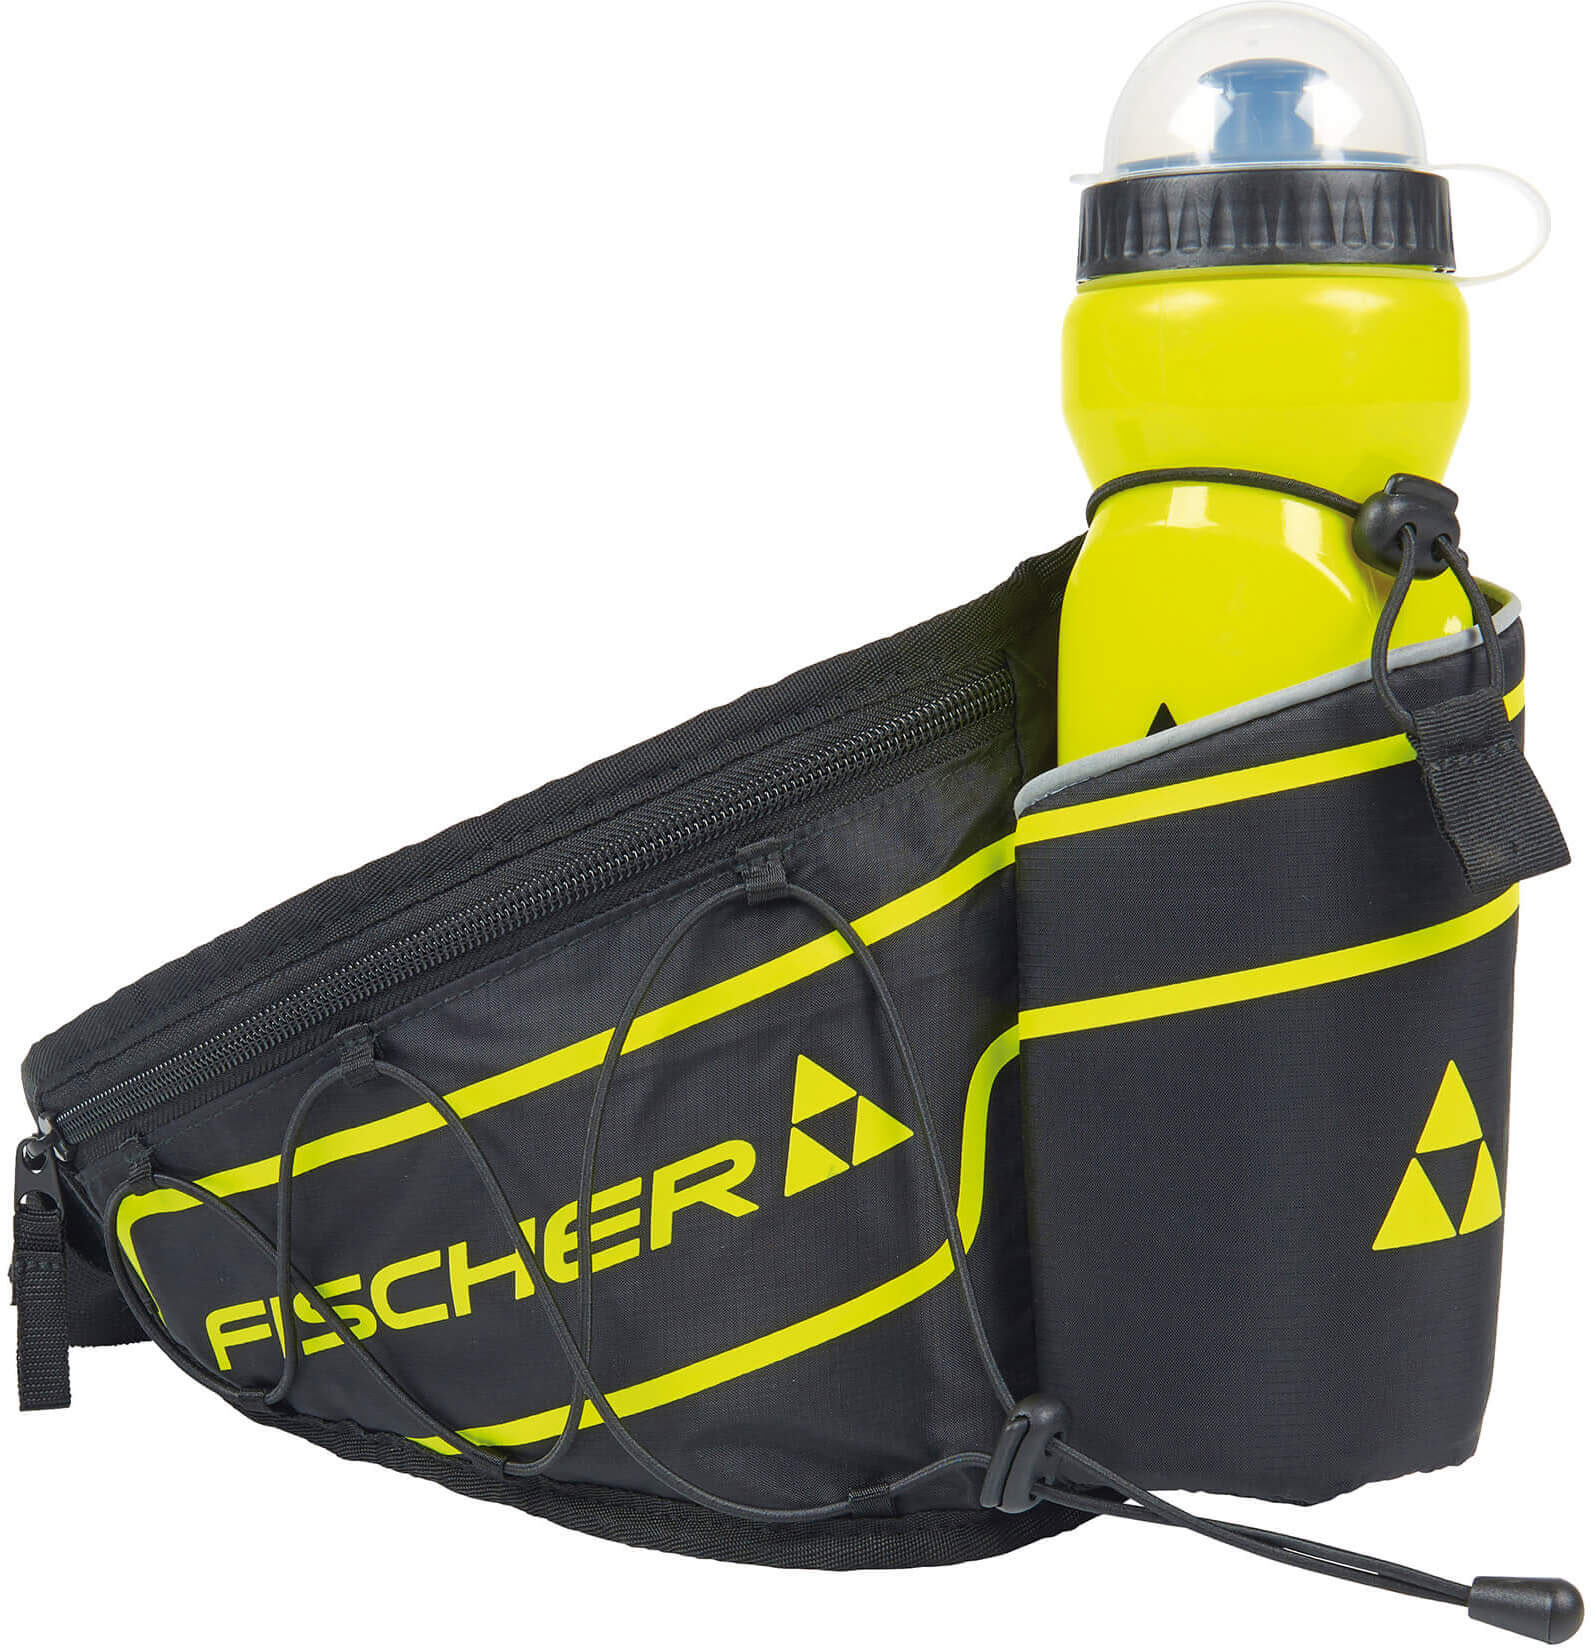 Waist bag with water bottle